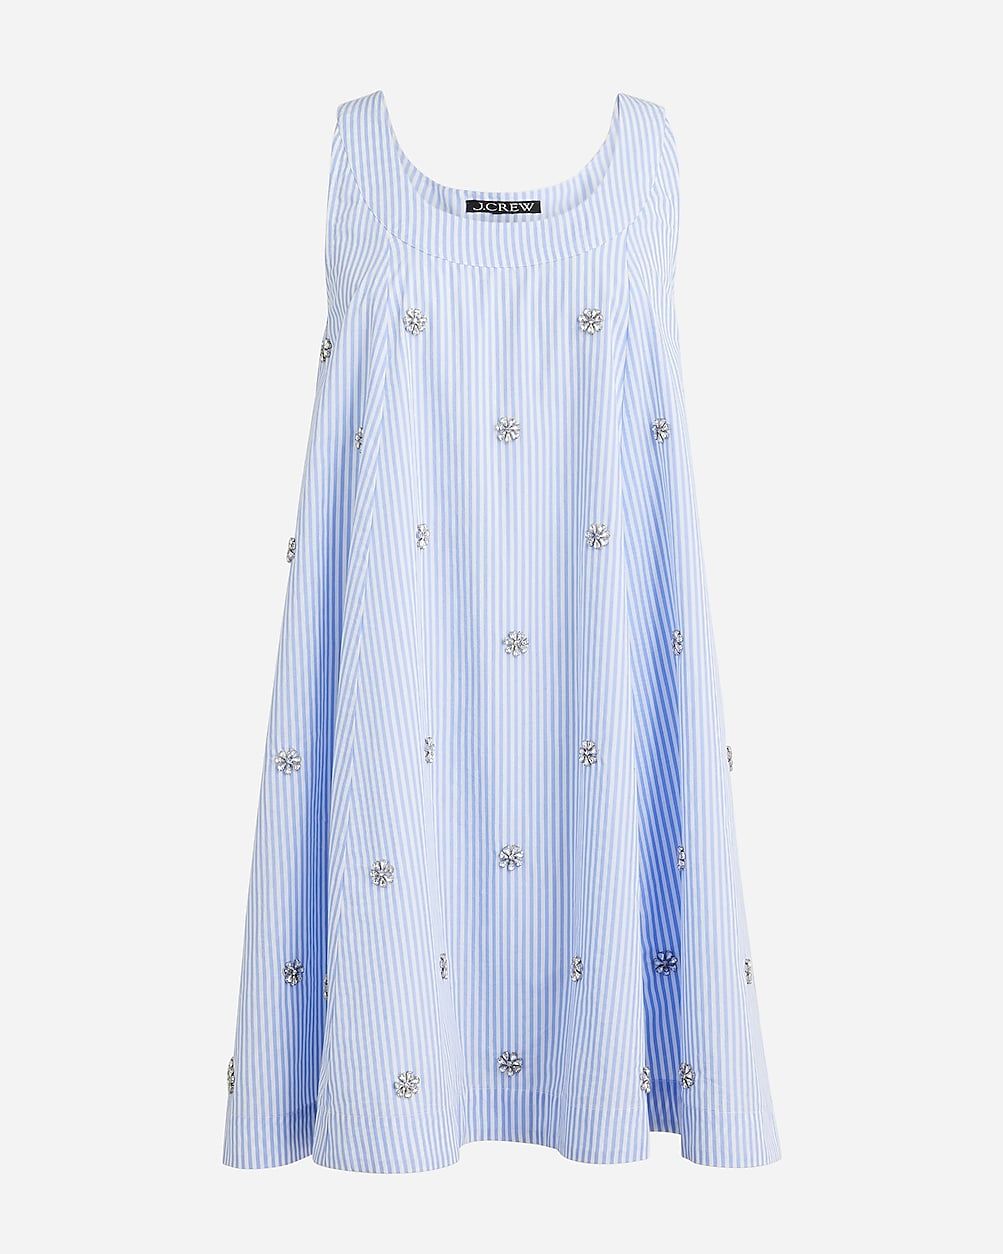 Collection embellished shift dress in cotton poplin | J.Crew US